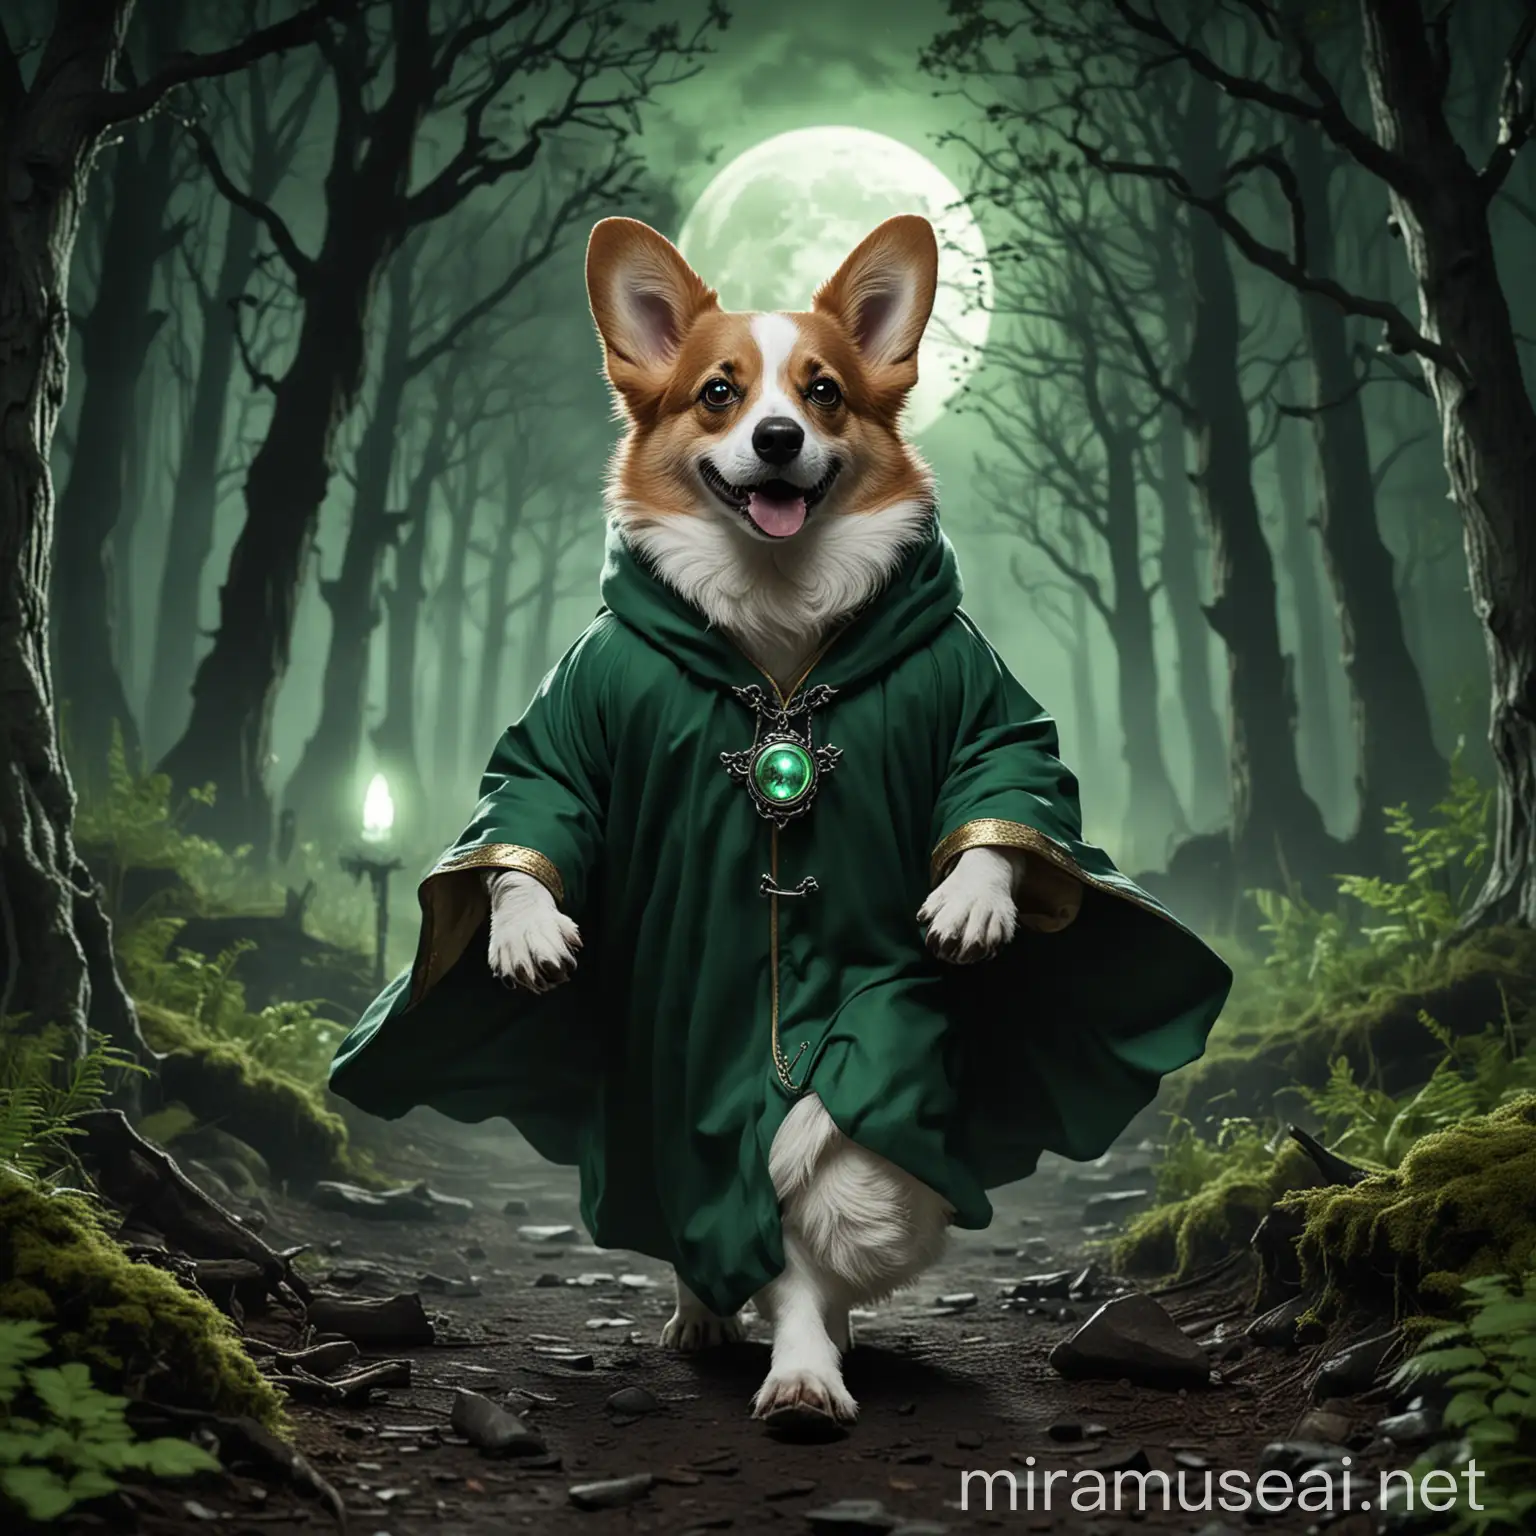 A humanoid corgi with one eye wearing green robes, casting dark green necrotic magic from his paws, walking in a dark fiery spooky forest with a full moon in the background